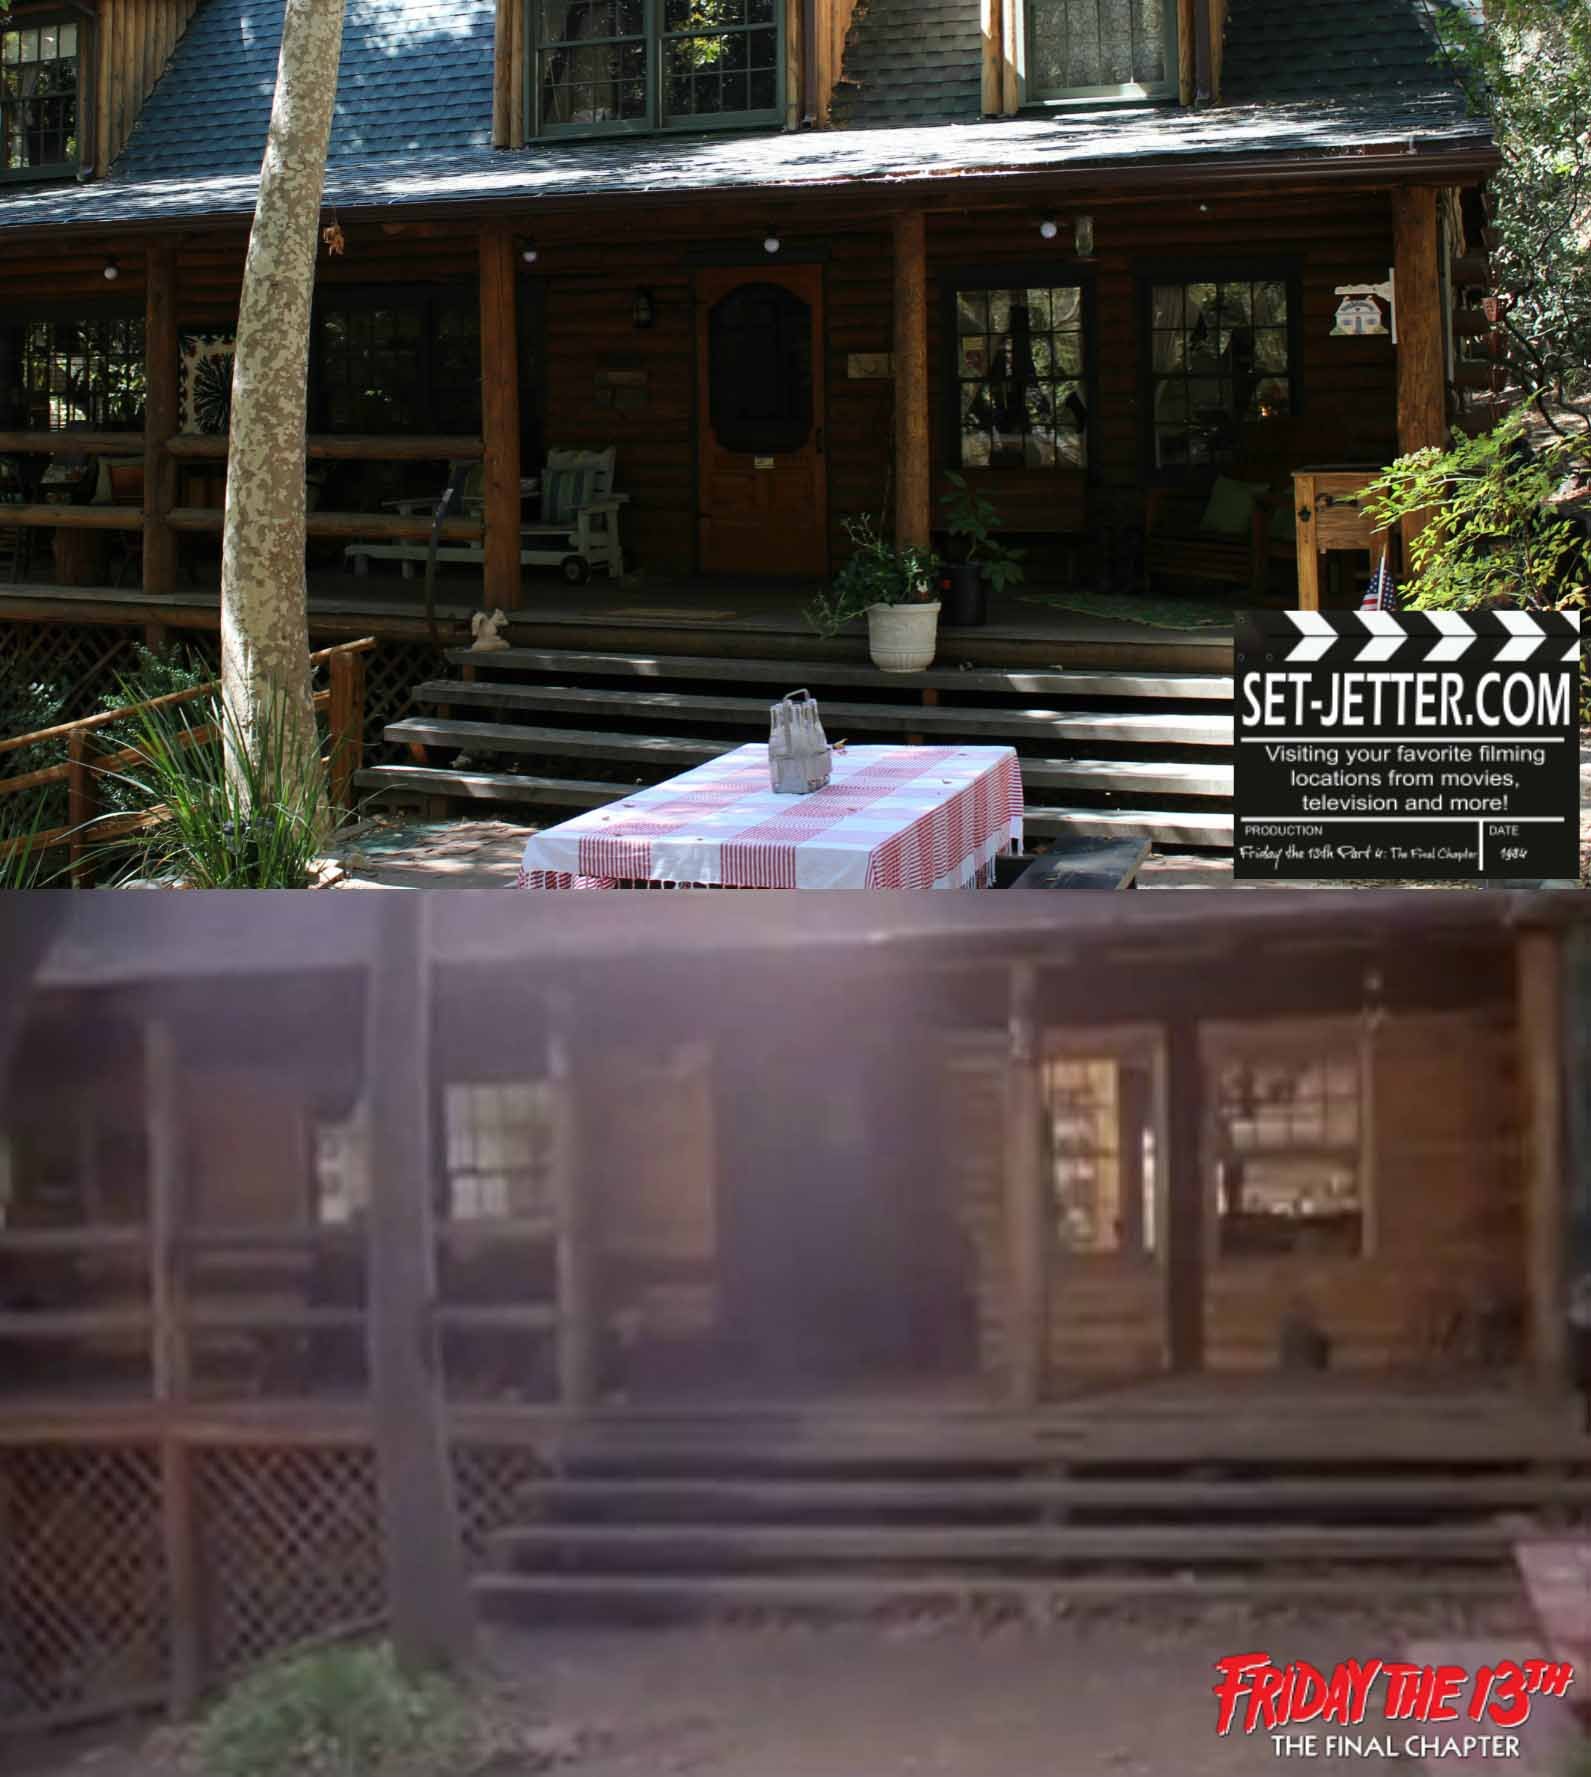 Friday the 13th The Final Chapter comparison 505.jpg